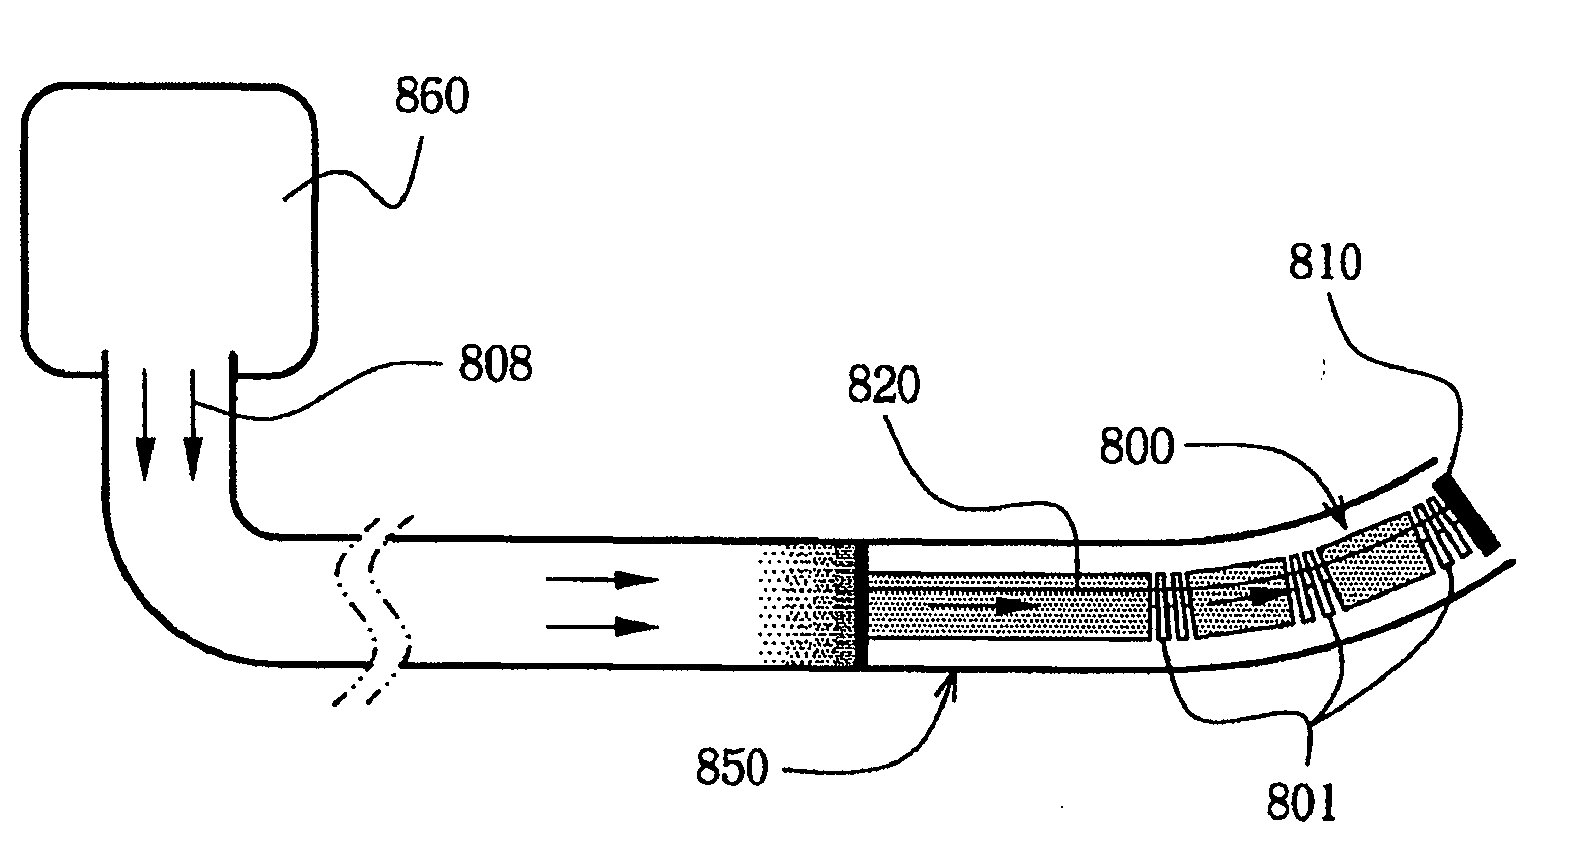 Tubular compliant mechanisms for ultrasonic imaging systems and intravascular interventional devices